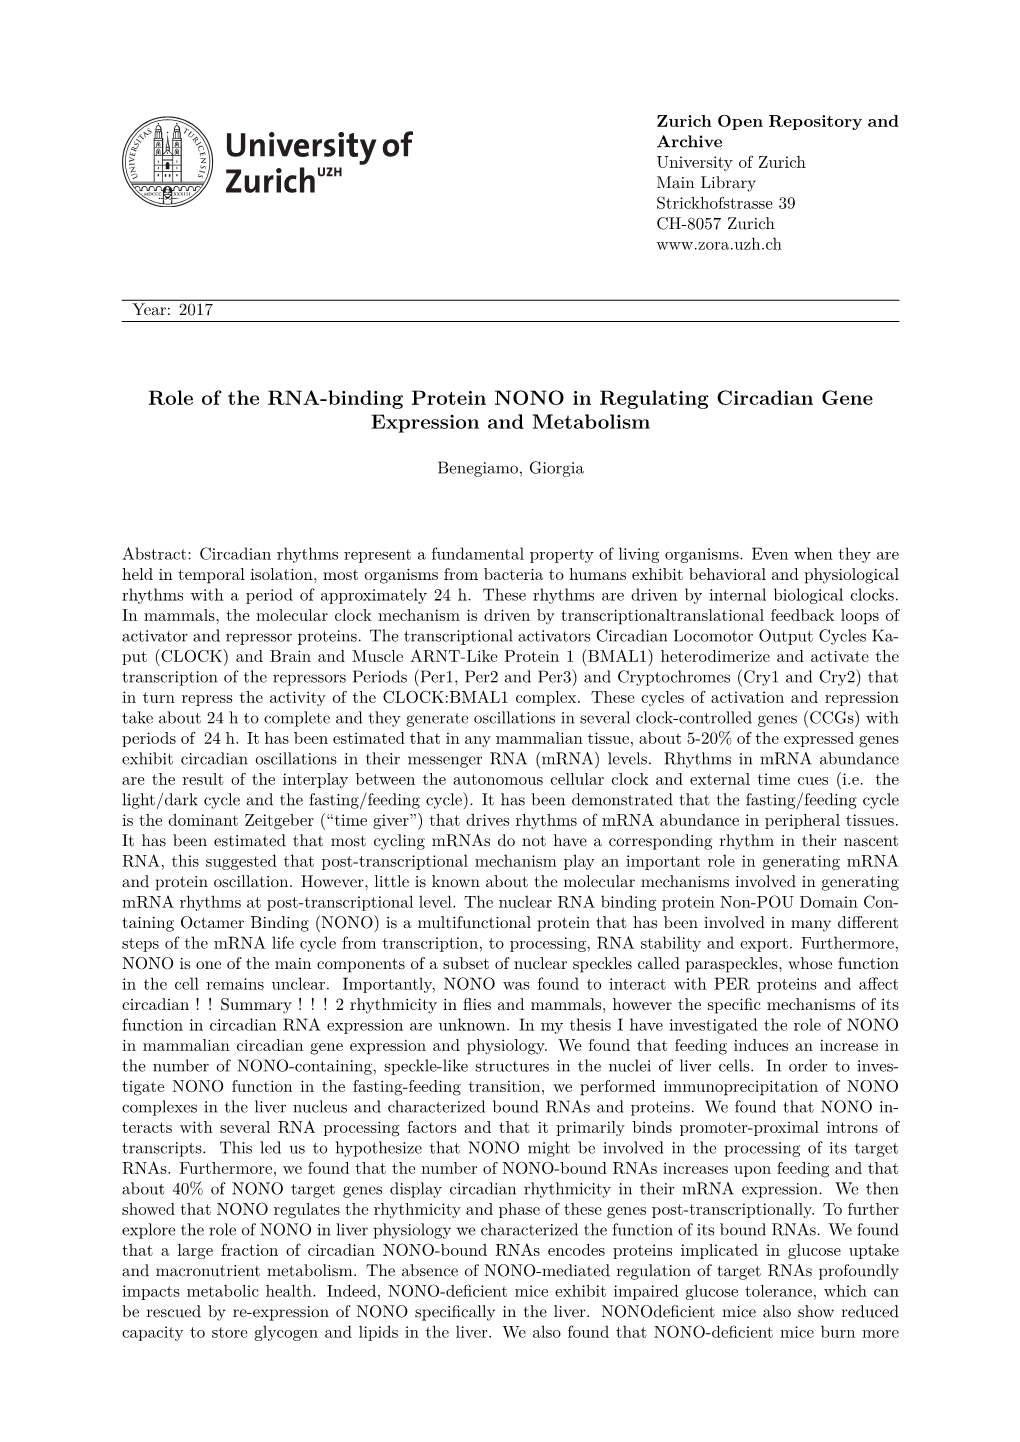 Role of the RNA-Binding Protein NONO in Regulating Circadian Gene Expression and Metabolism